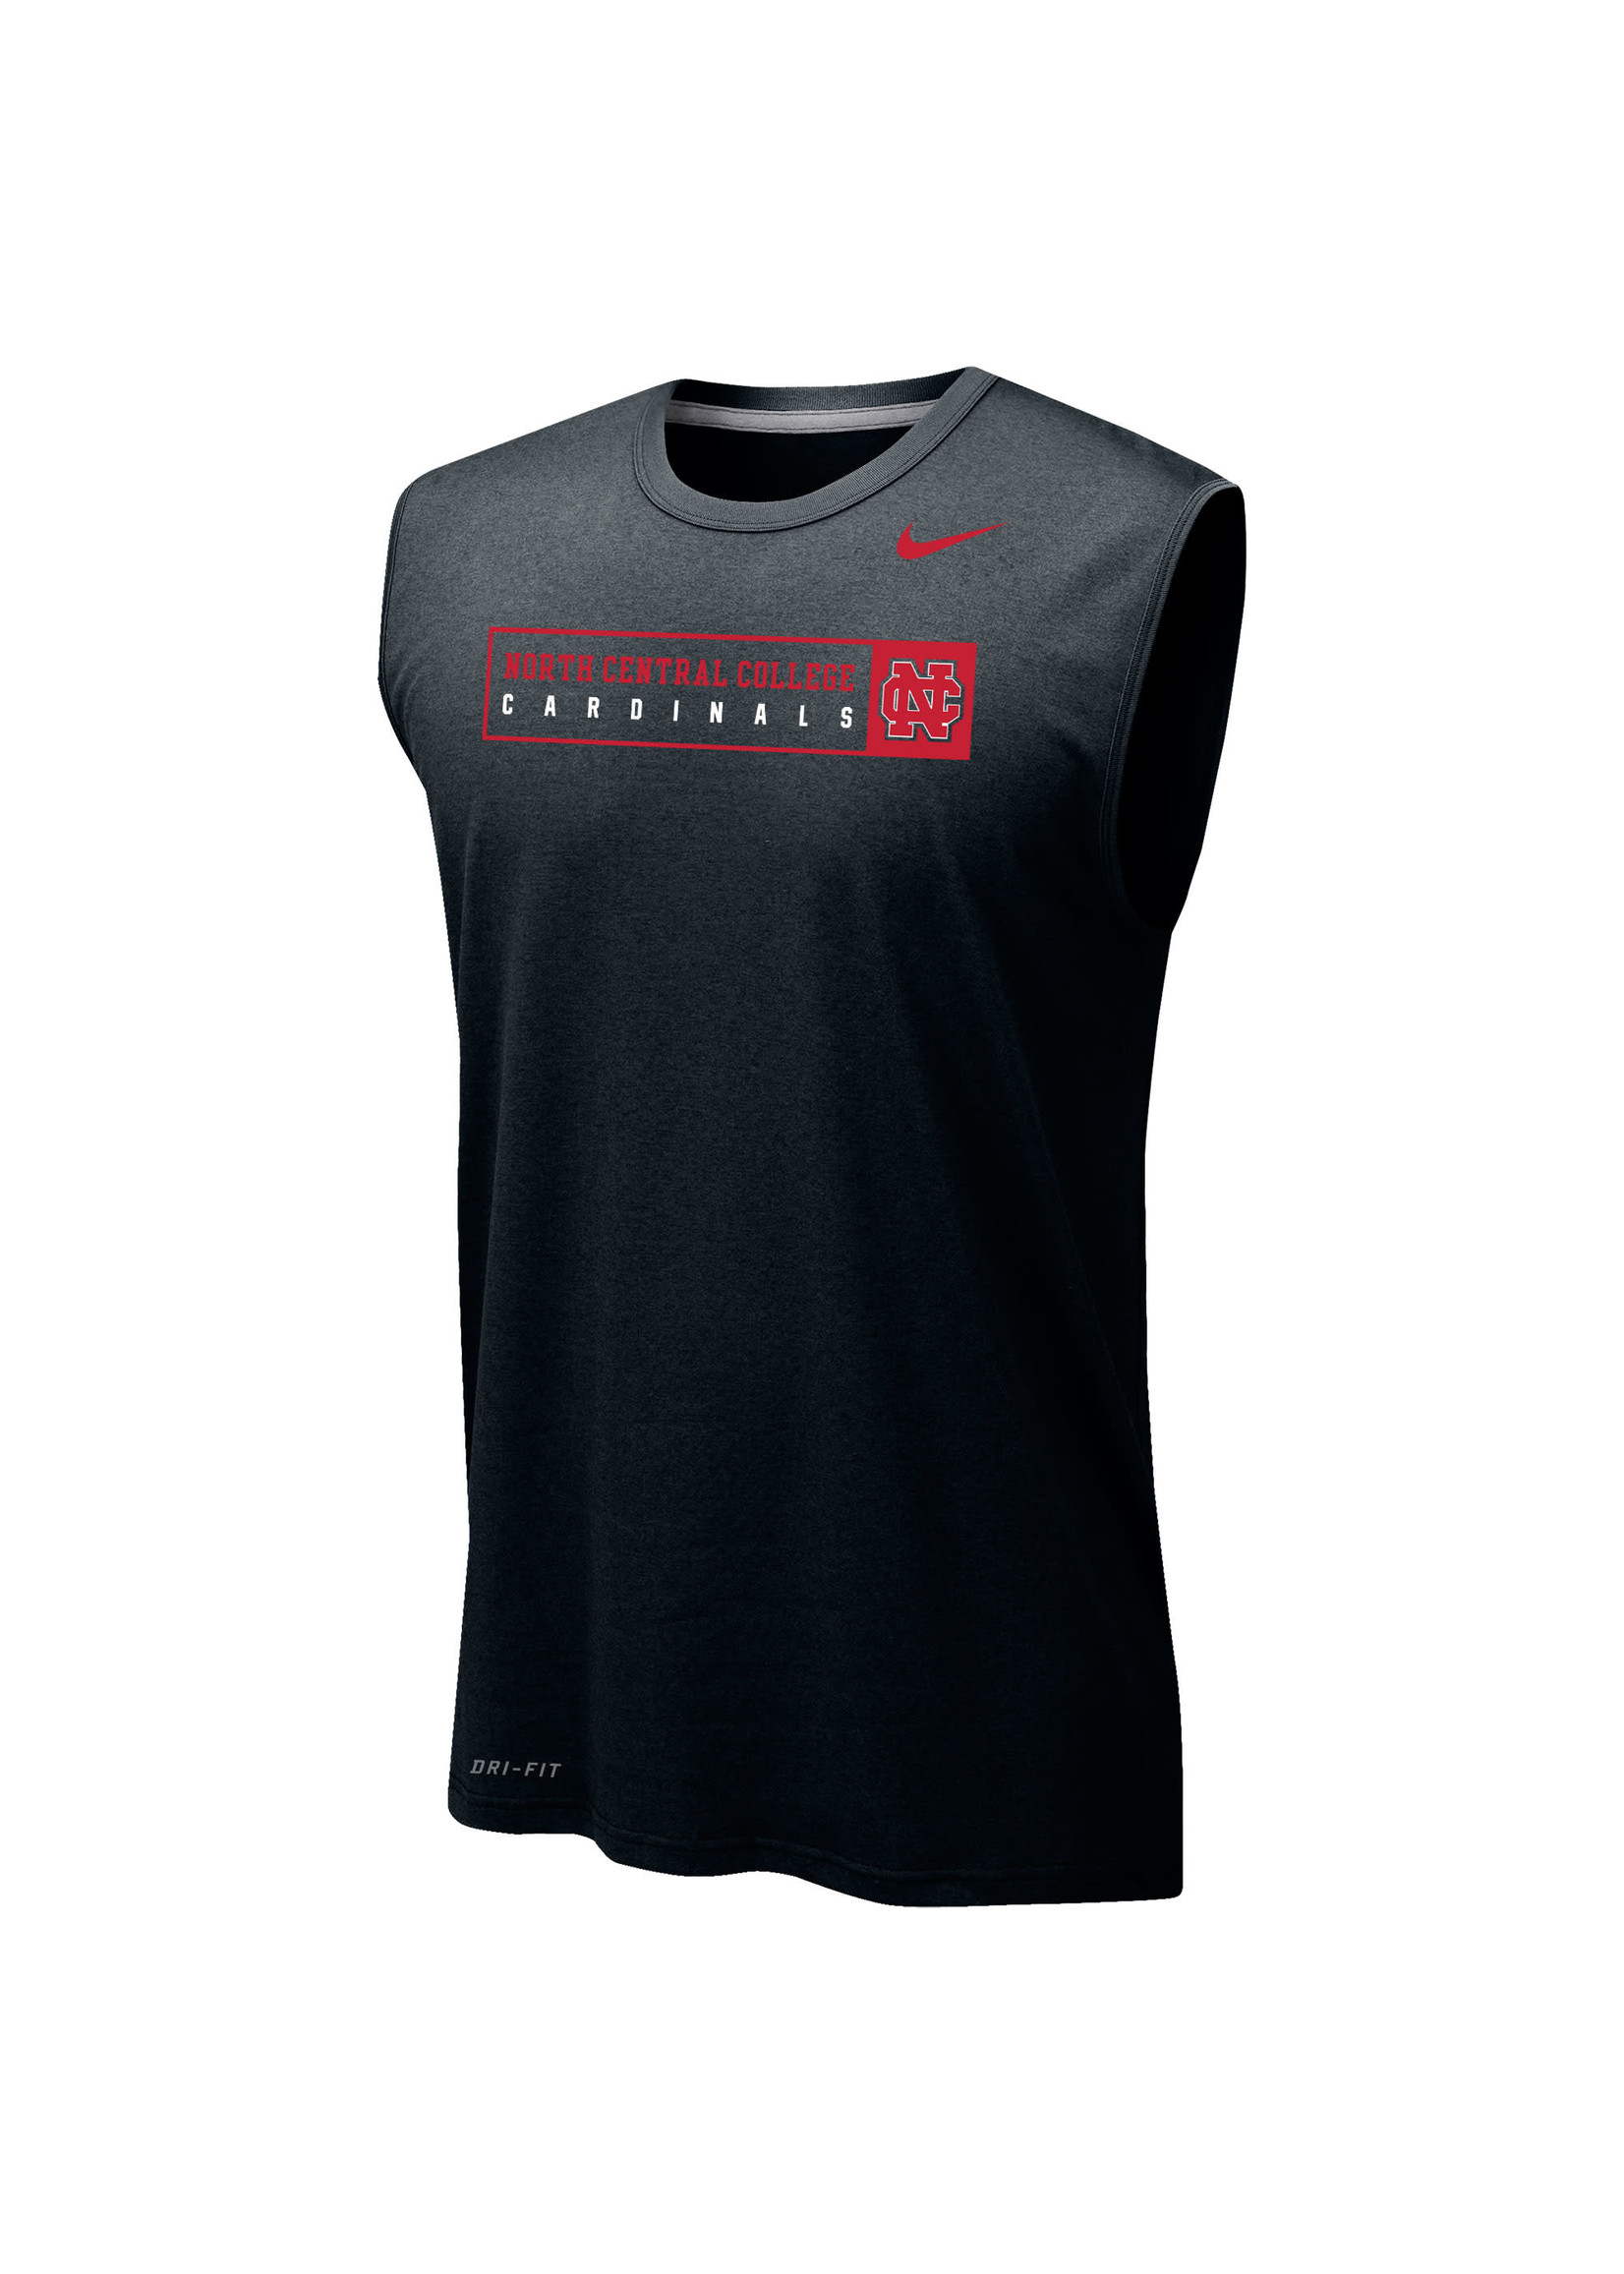 Maak een bed kin Farmacologie North Central College Legend Sleeveless Tee by Nike - North Central College  Campus Store